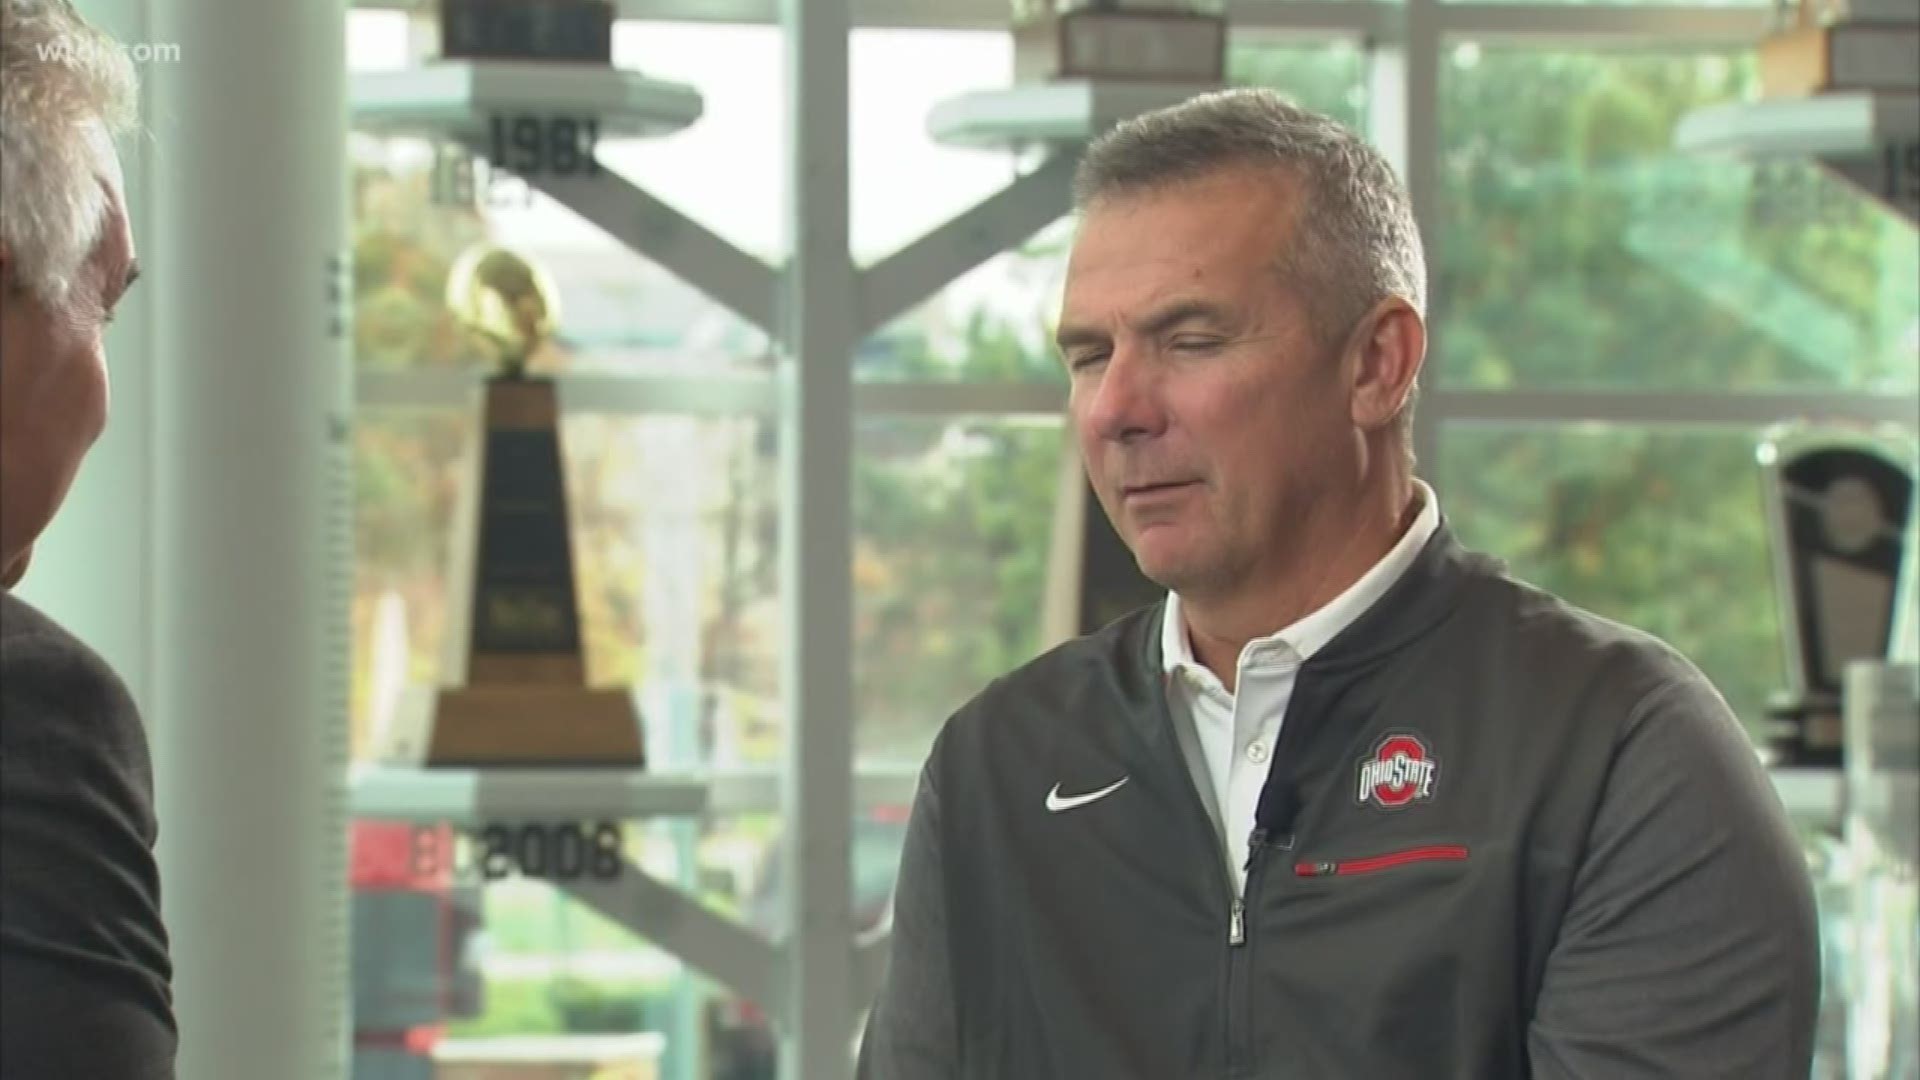 Urban Meyer sat down with Dom Tiberi, from our sister station in Columbus, WBNS, ahead of OSU-MU game.